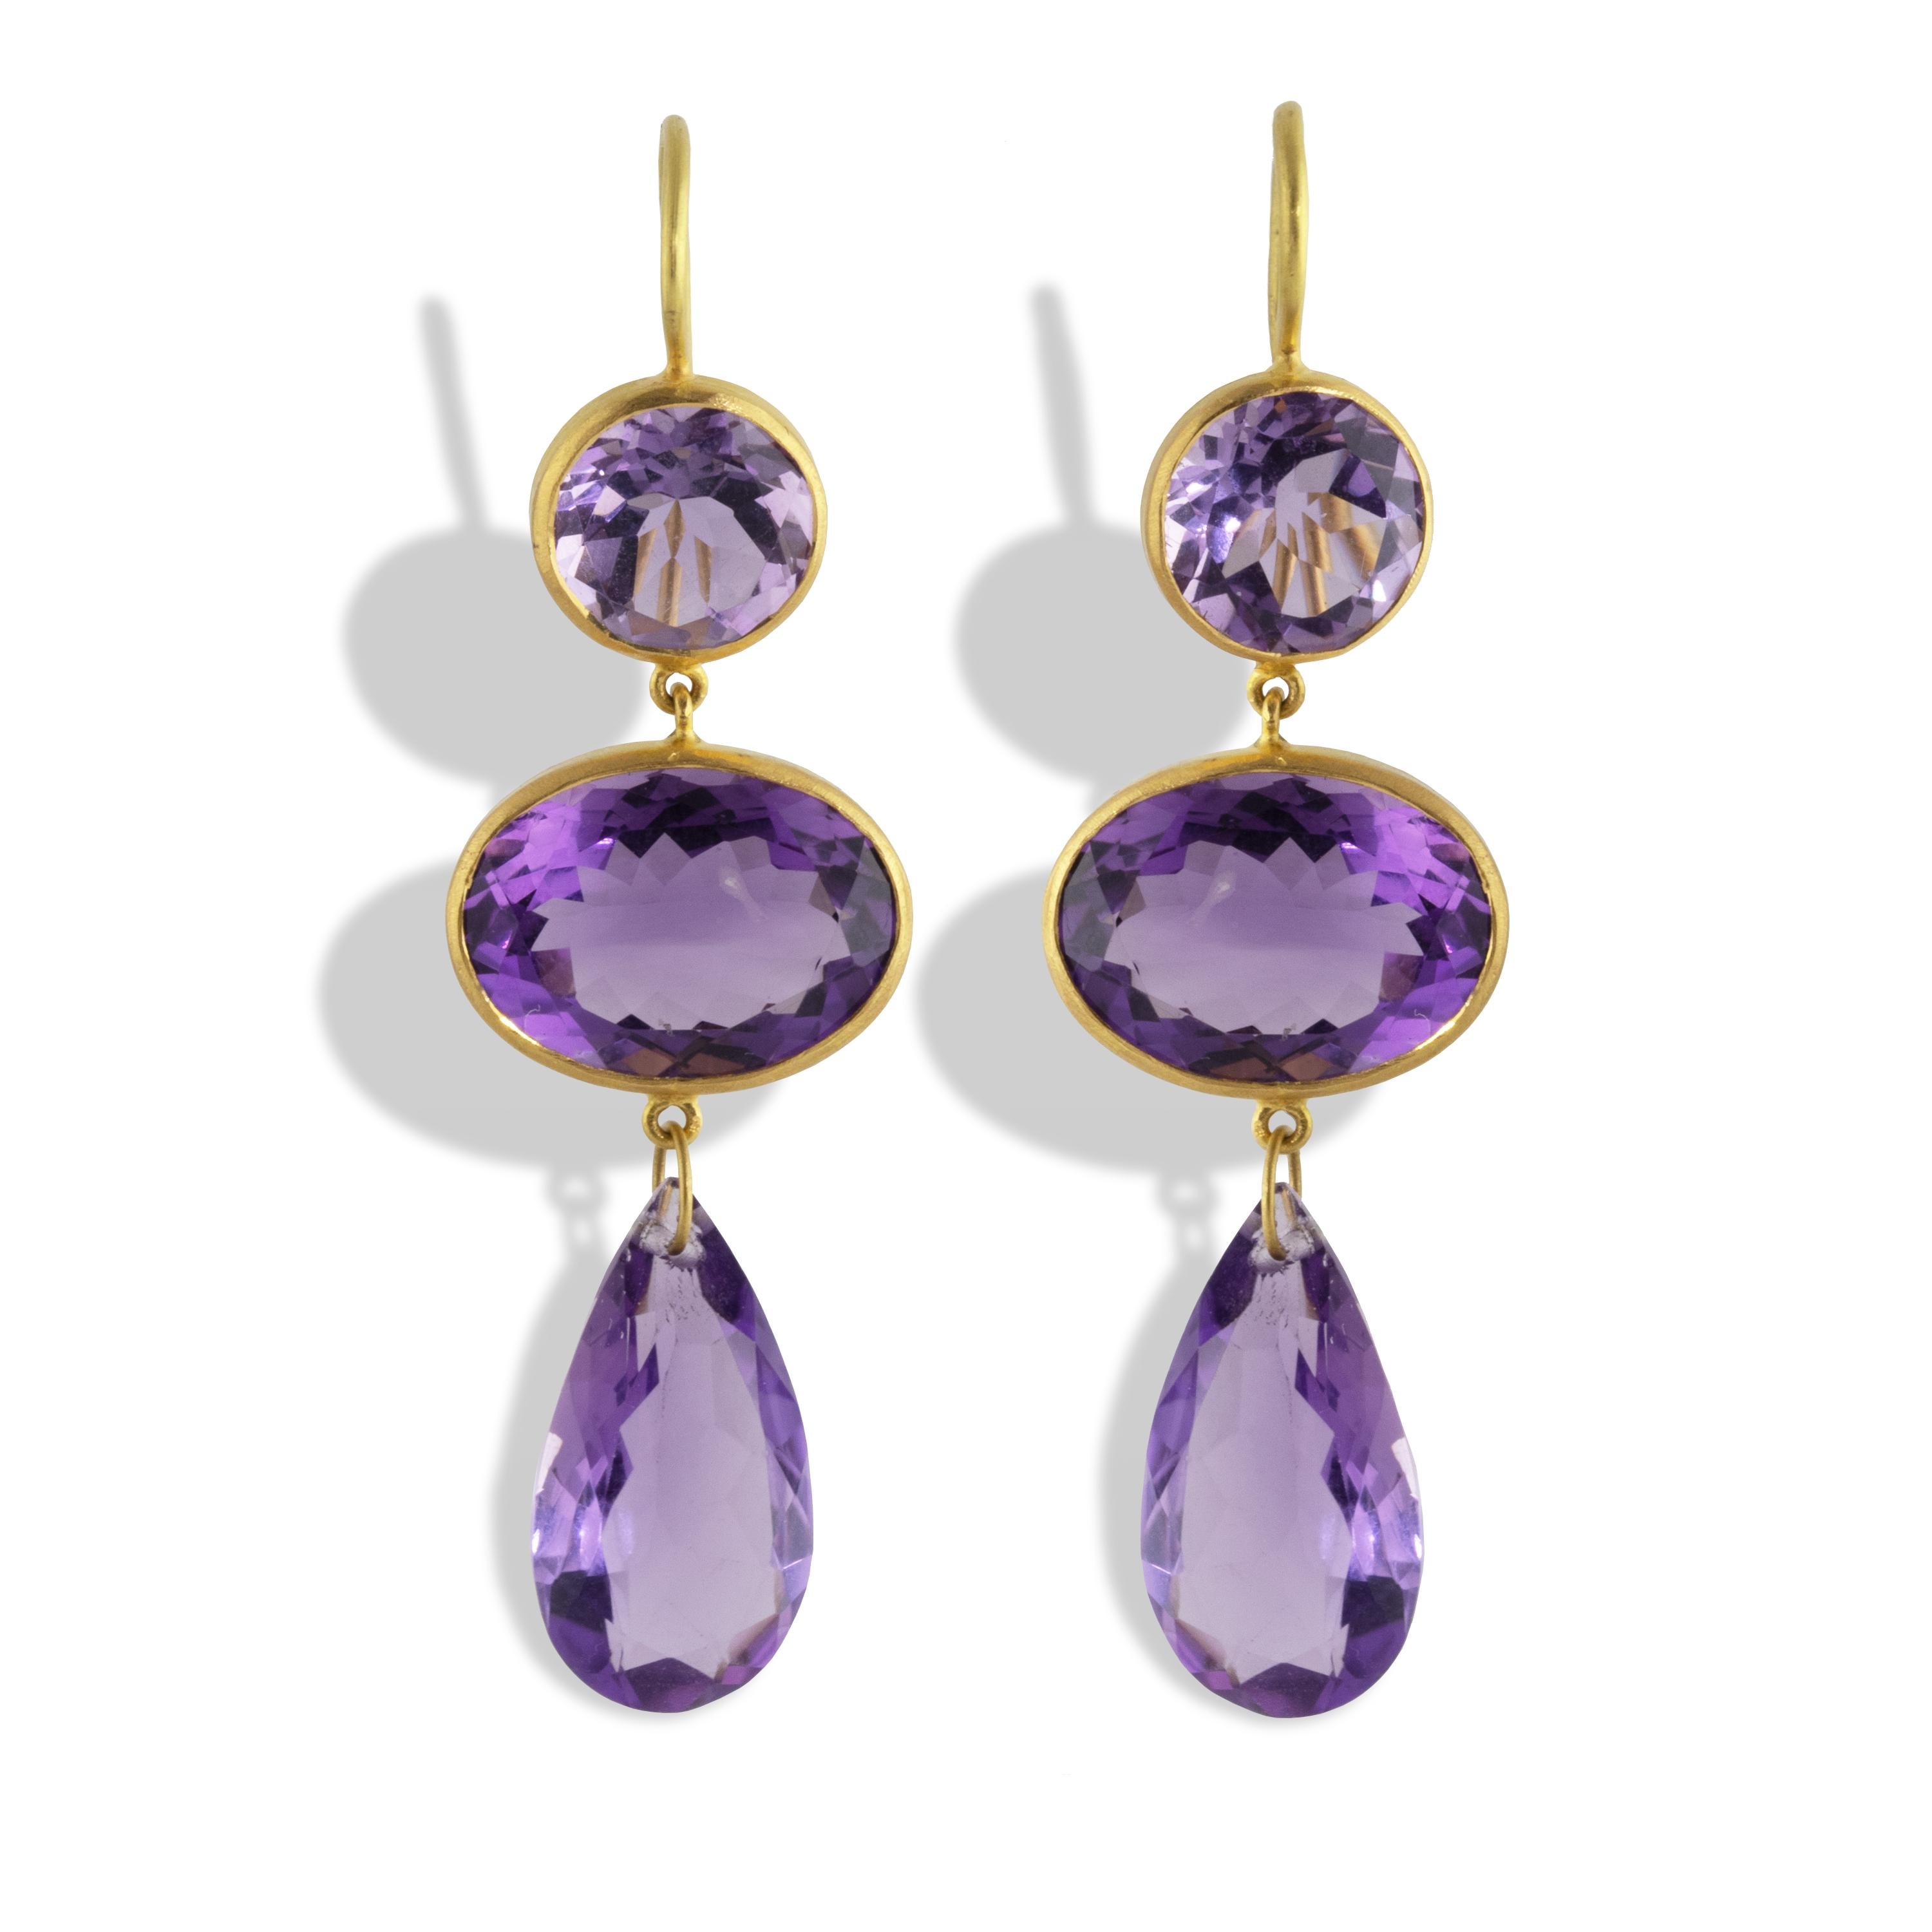 Spectacular statement earrings made from 35.64 carats of Brazilian Amethyst and set in 22k yellow gold.  
Measuring 58mm long (2.25